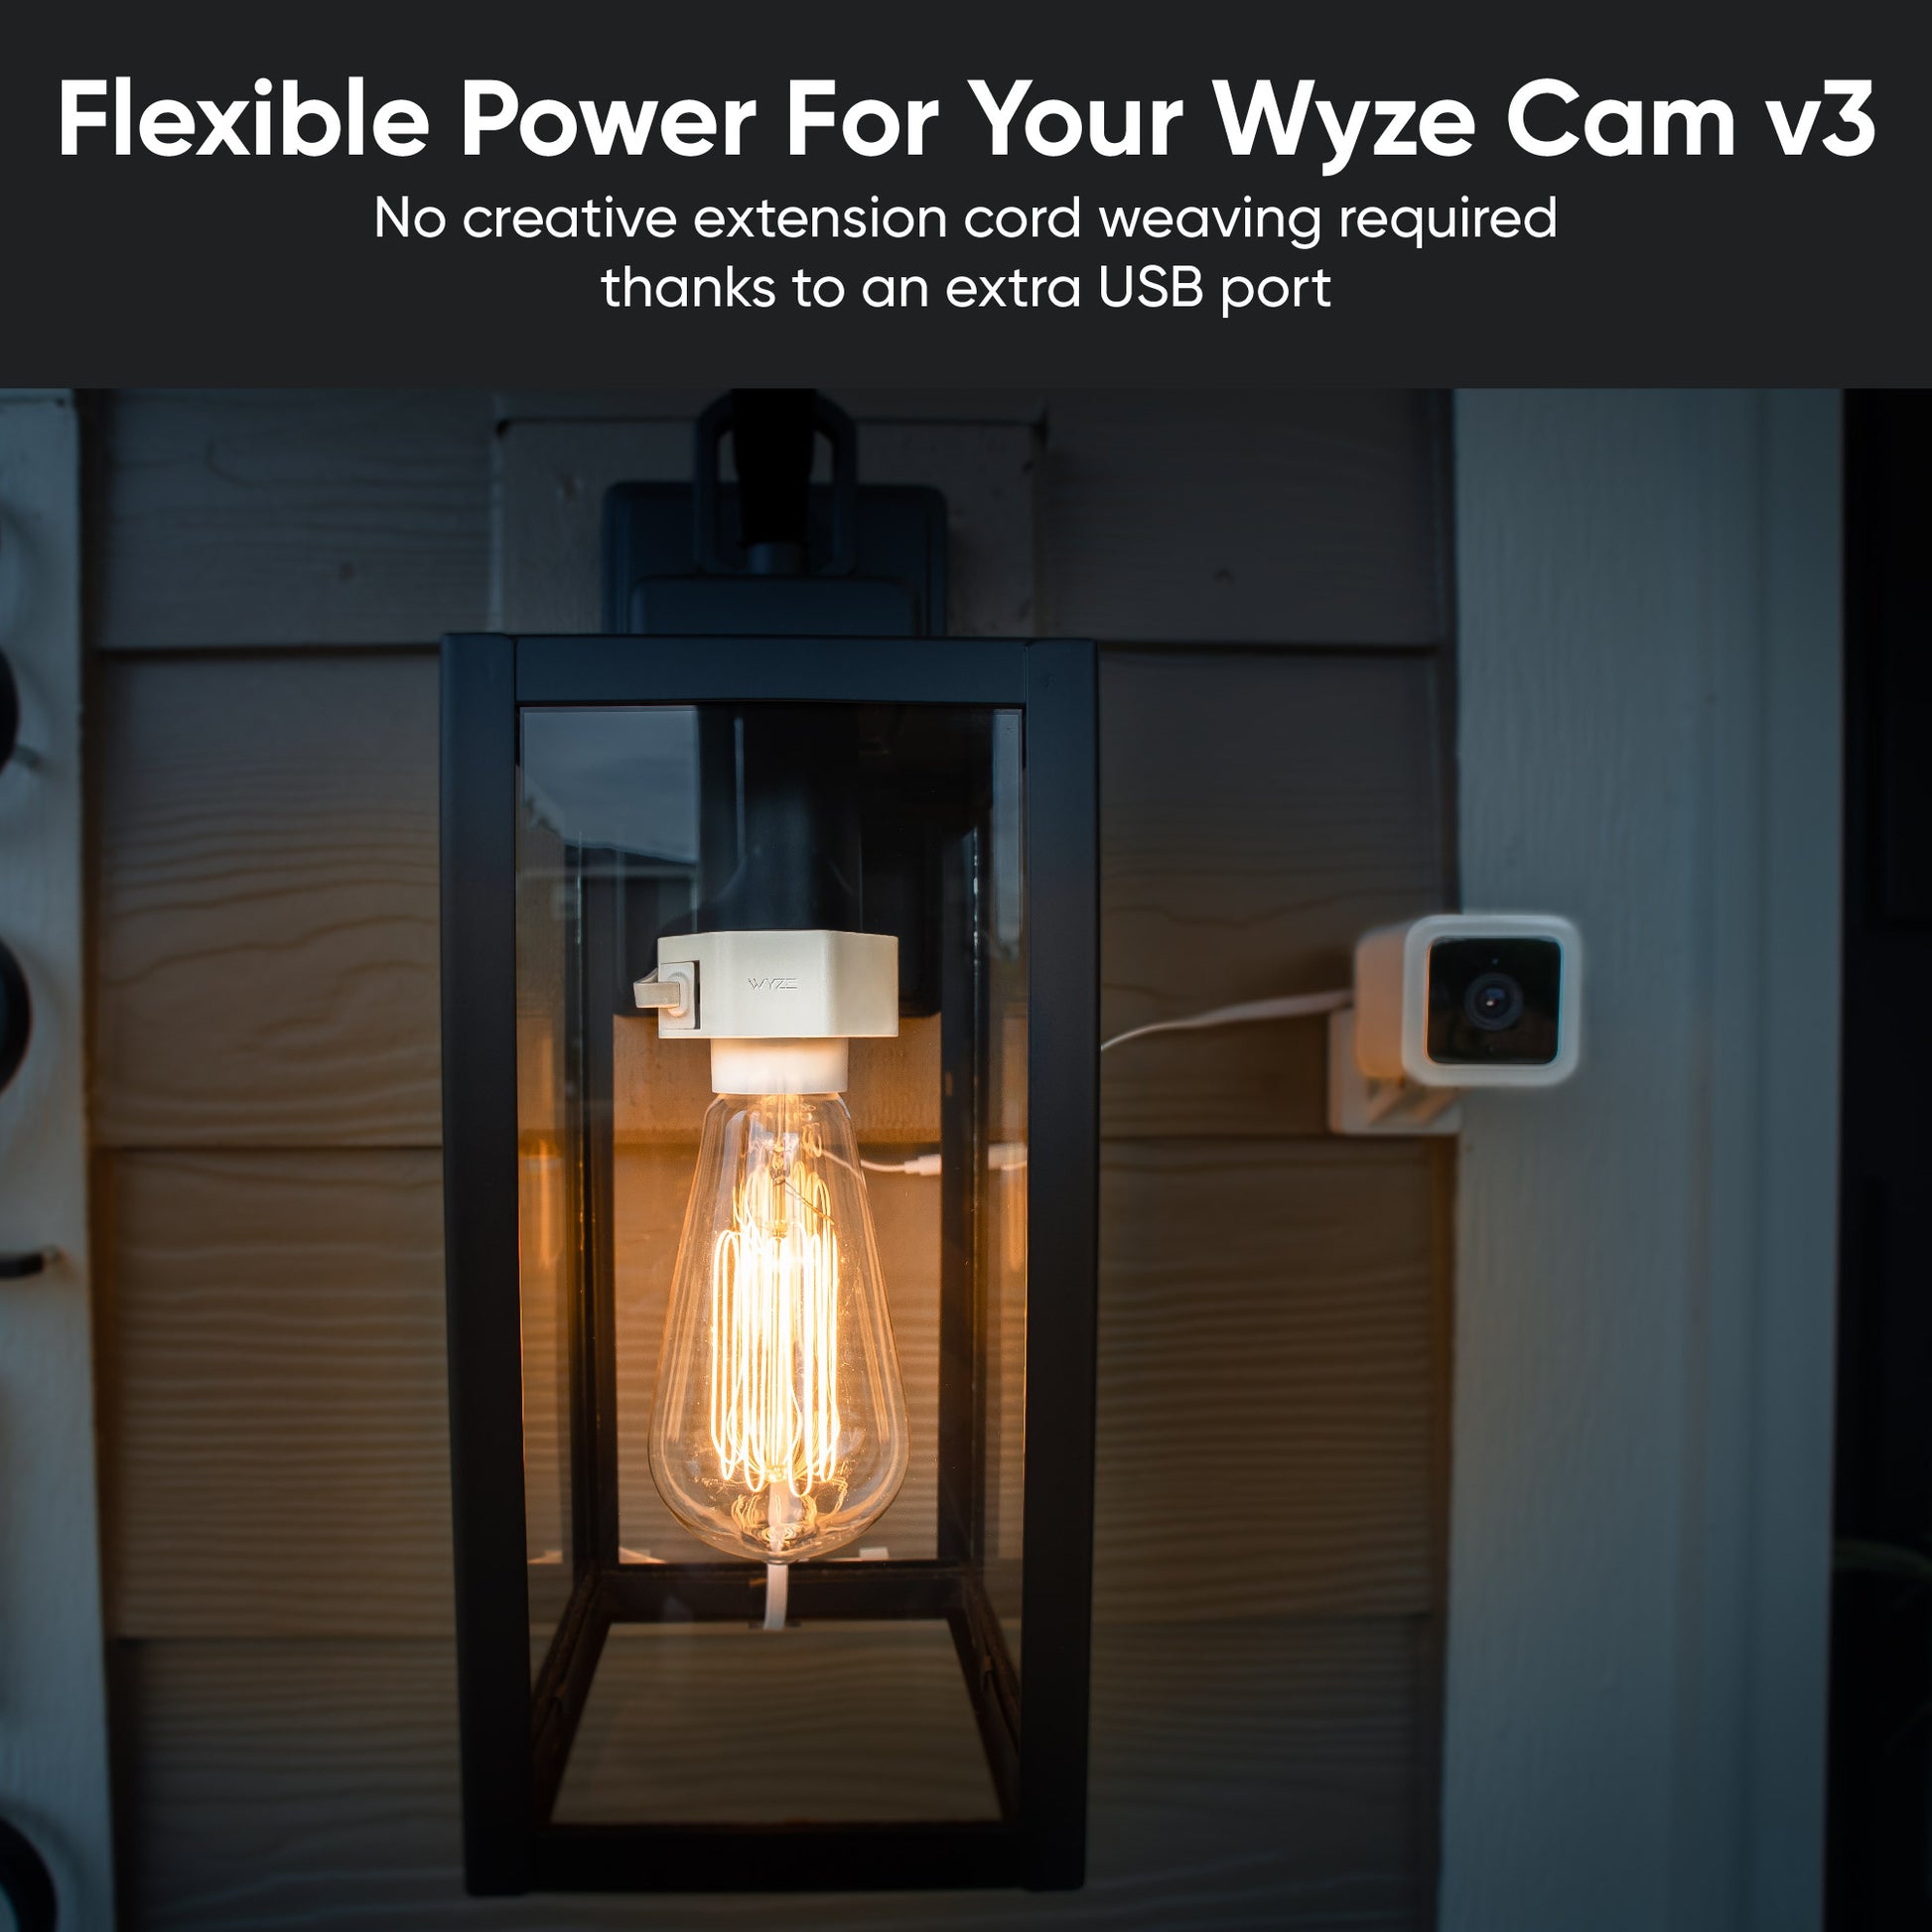 Is there a way to fit a Wyze cam into a light plug? - Power